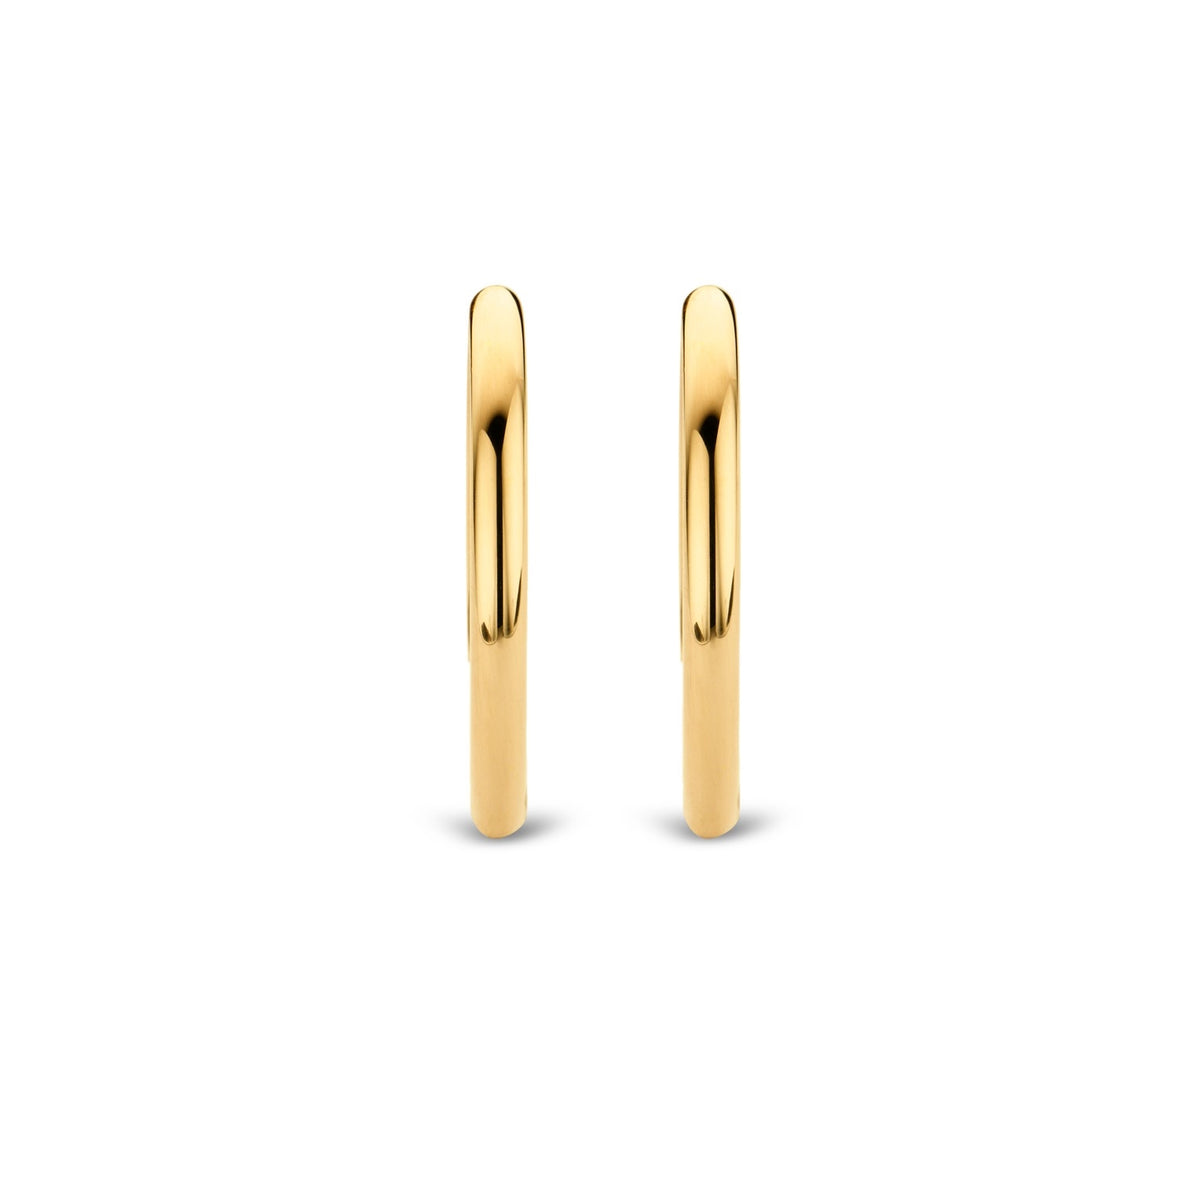 TI SENTO Sterling Silver Gold Tone Hoop Earring